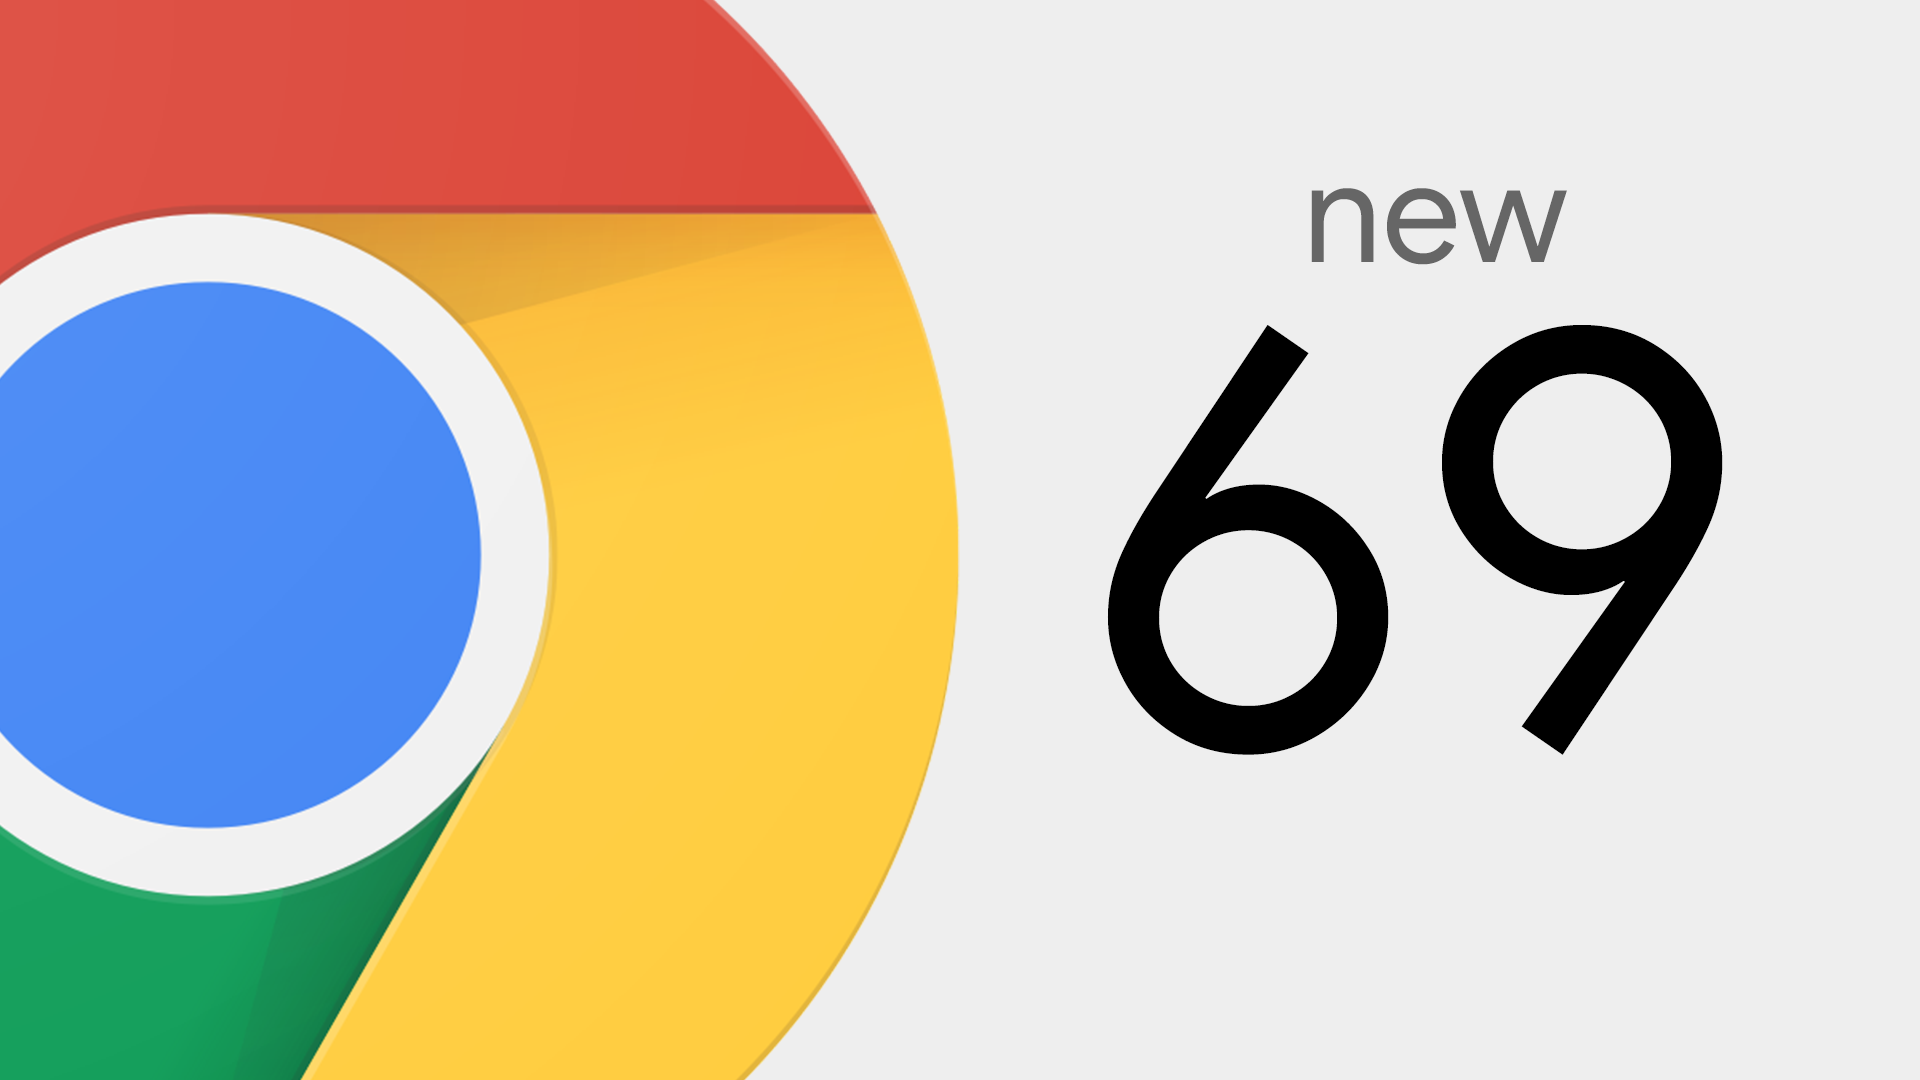 New in Chrome 69